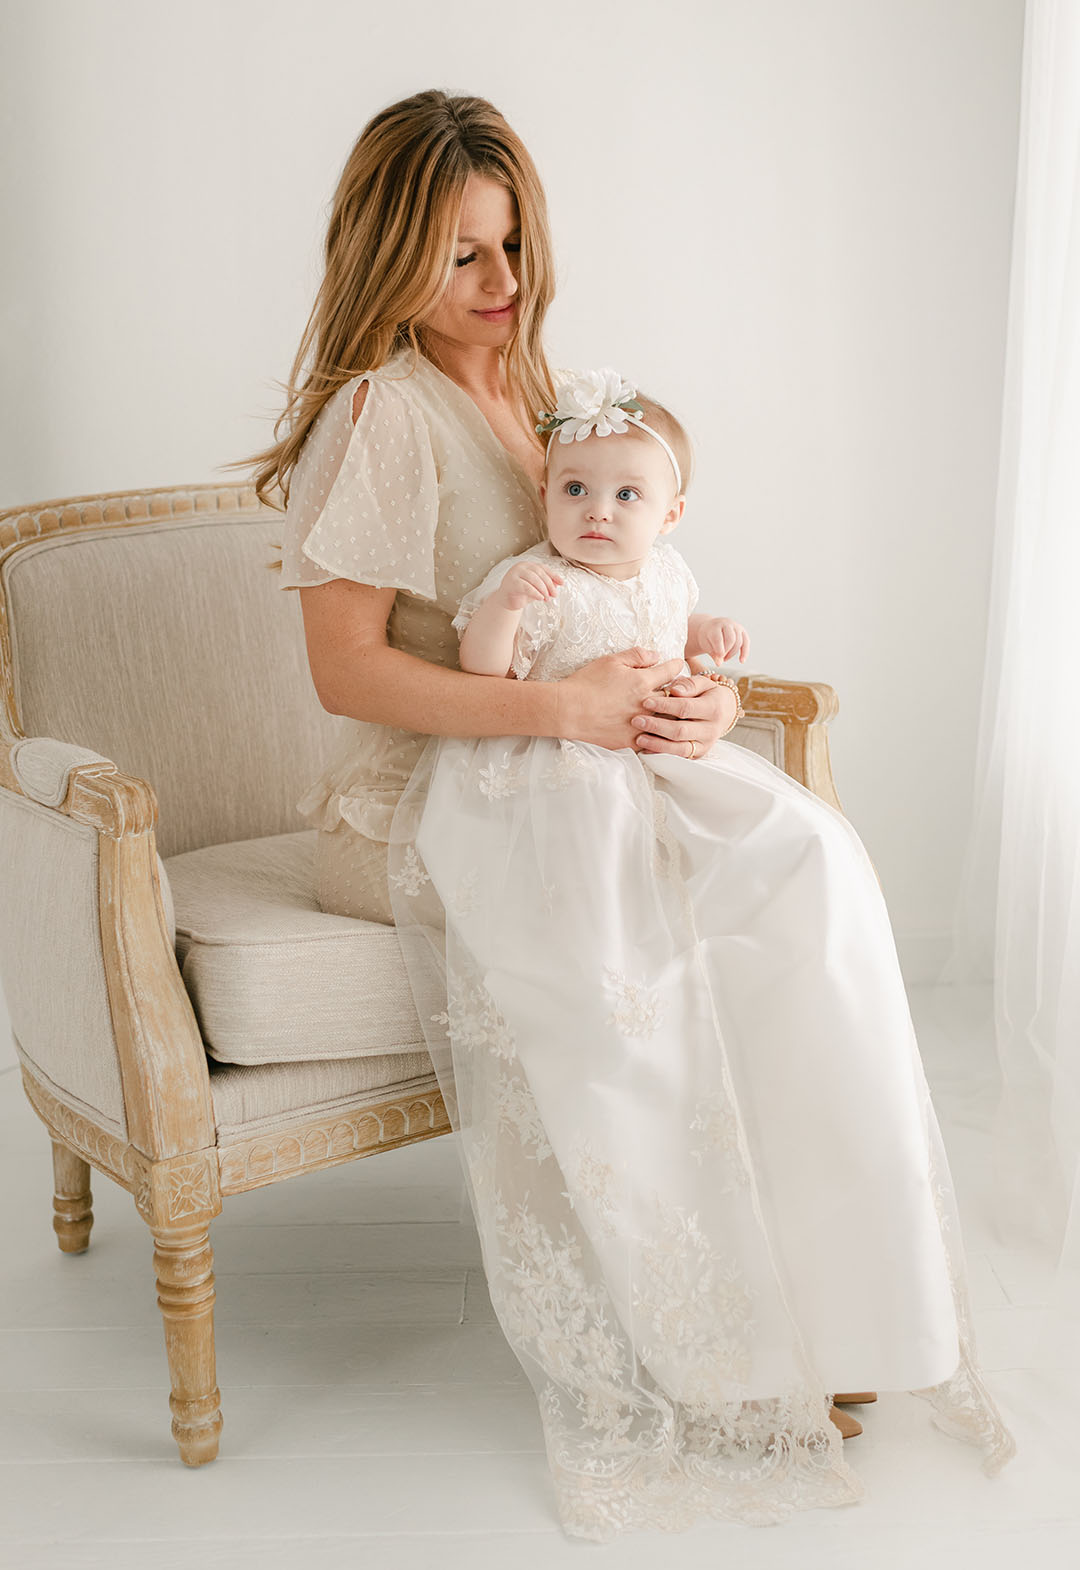 A woman sits on an elegant armchair holding a baby dressed in a white lace gown and headband for a christening, both looking towards the camera in a bright room